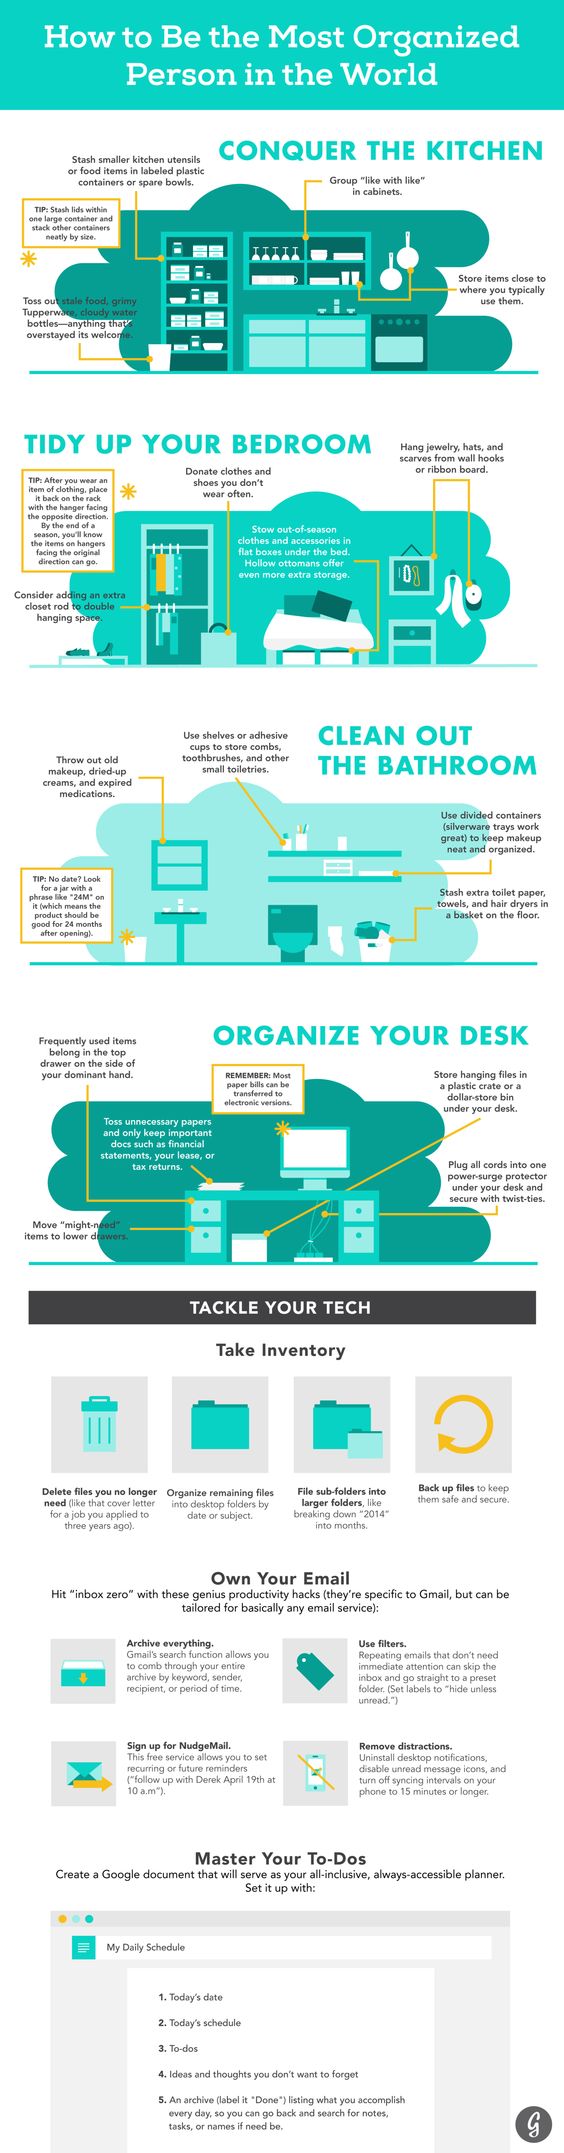 The Ultimate Guide to Being the Most Organized Person in the World #organization #home #office